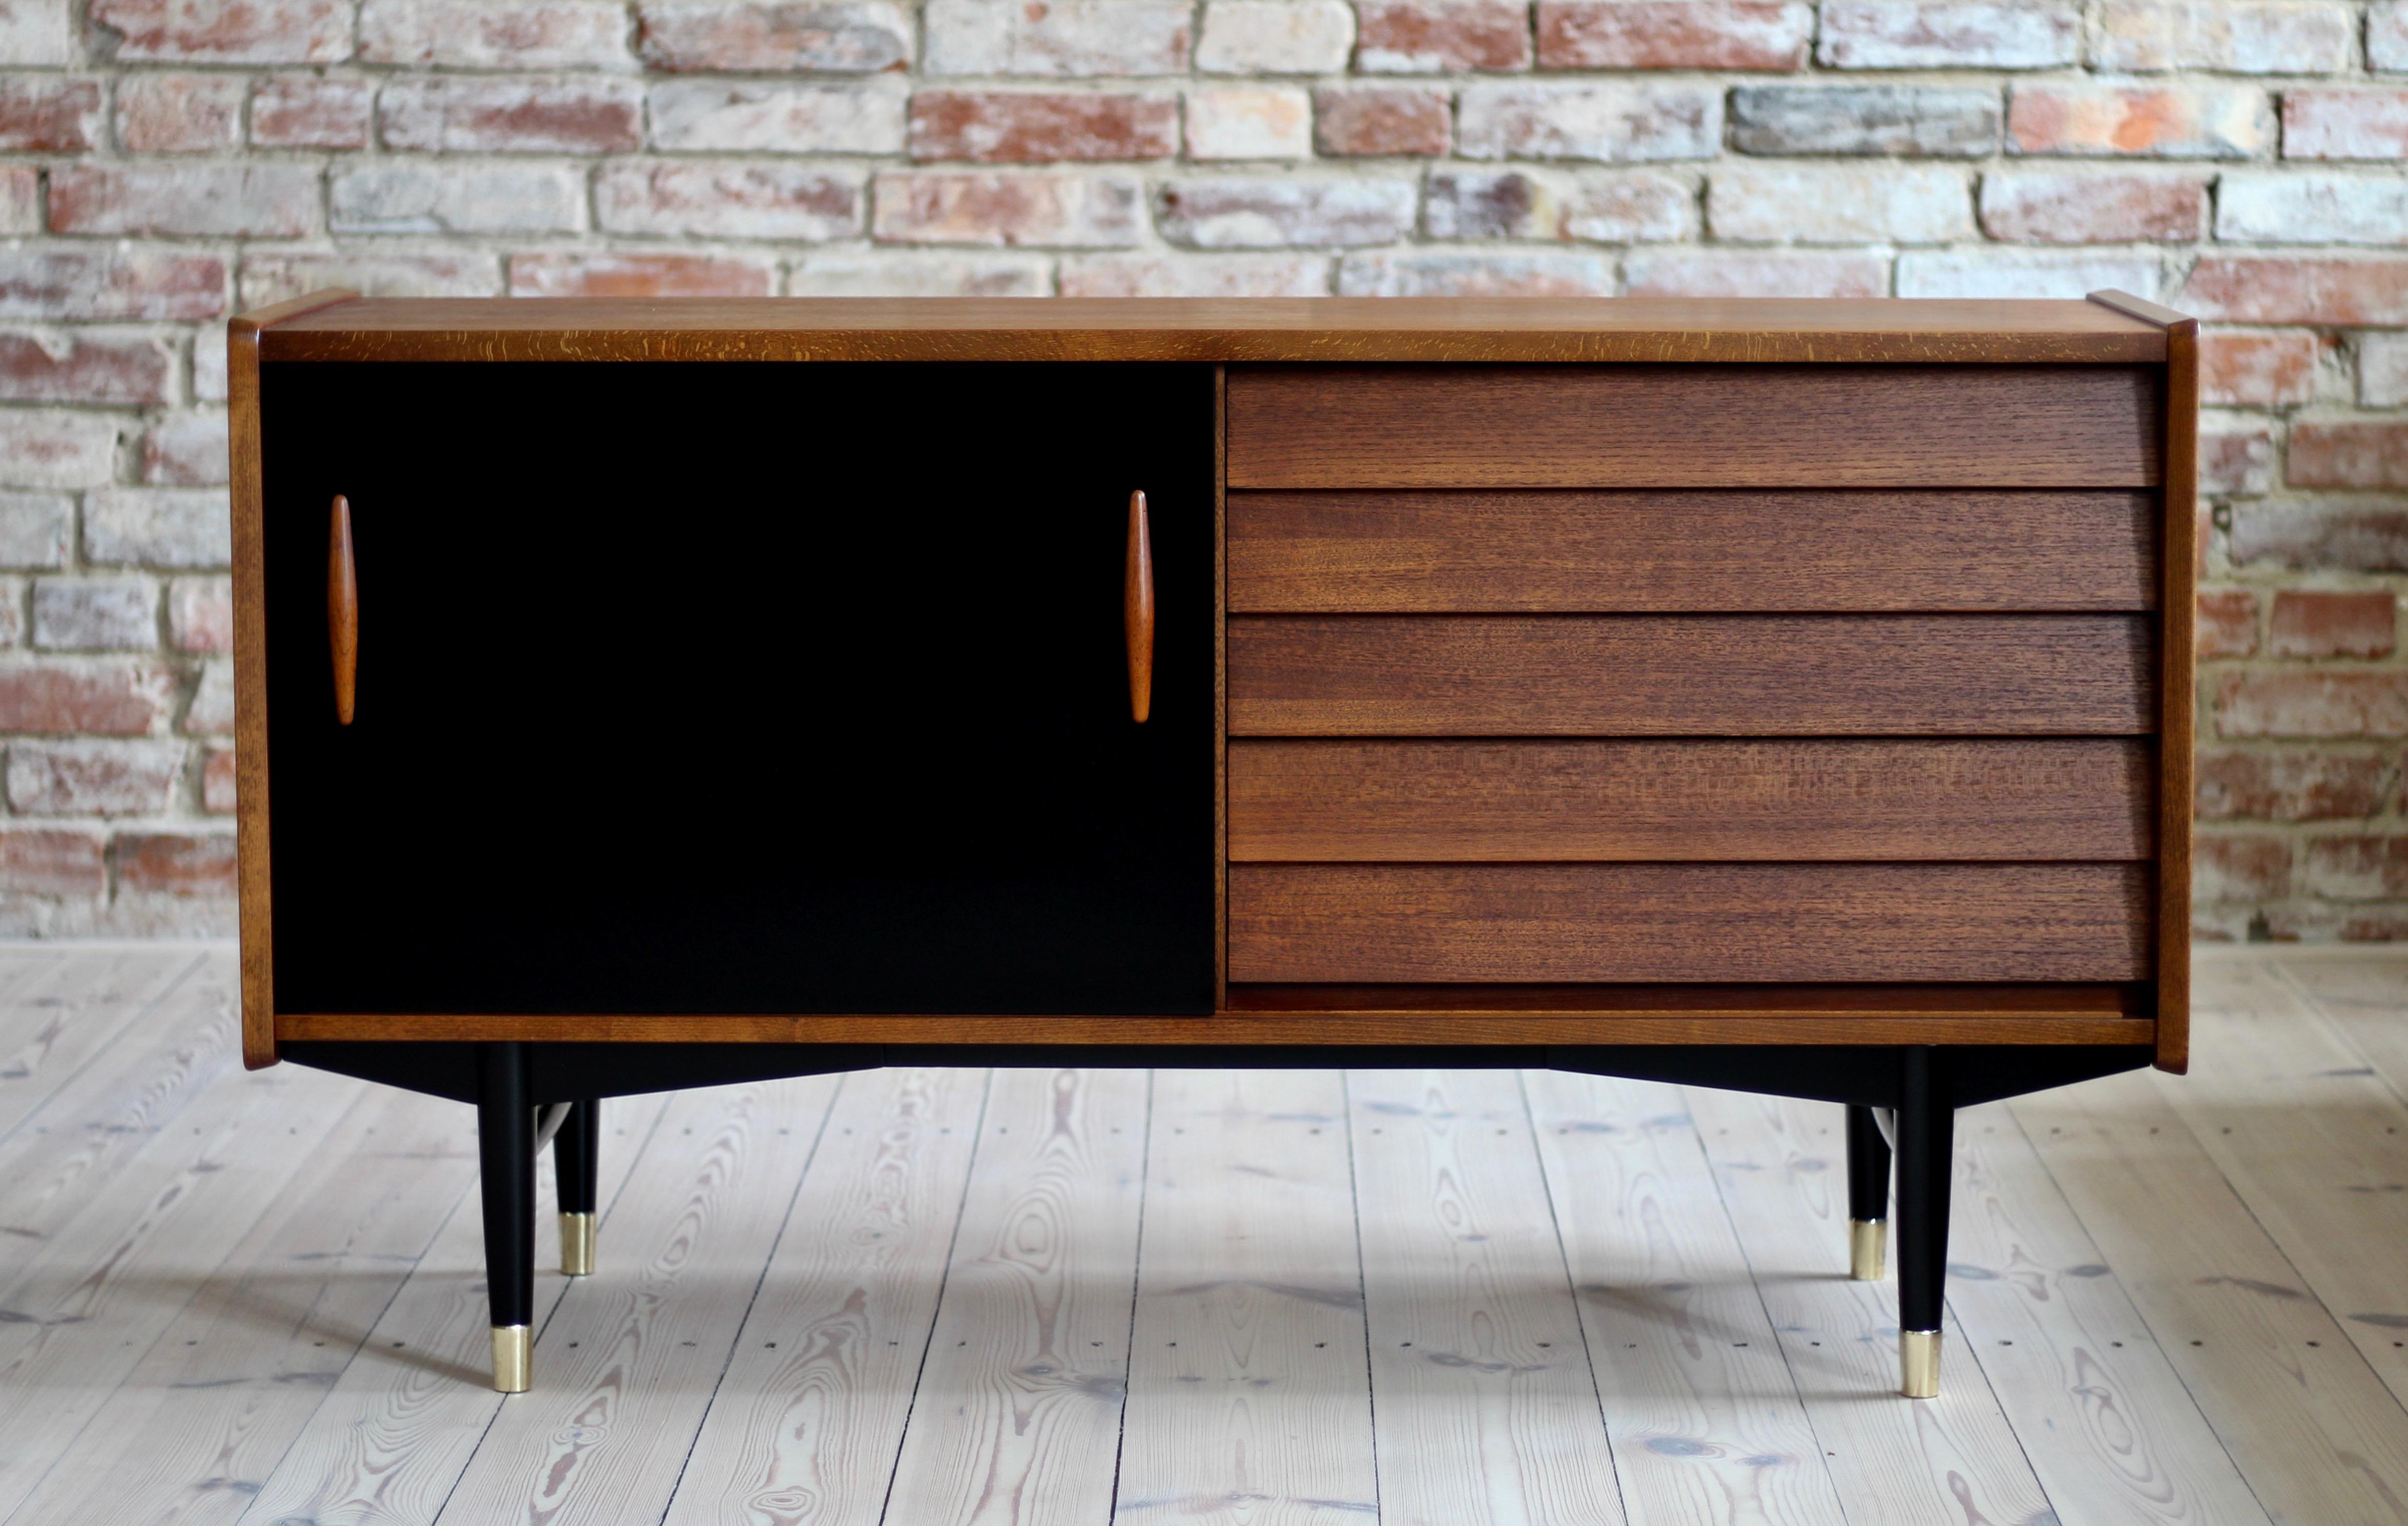 This is a not so common model of sideboard by Nils Jonsson in teak wood with black sliding door, two sculpted handles, elegant black base completed with subtle brass legs cups - a great example of Scandinavian Modern style in its best. The piece was